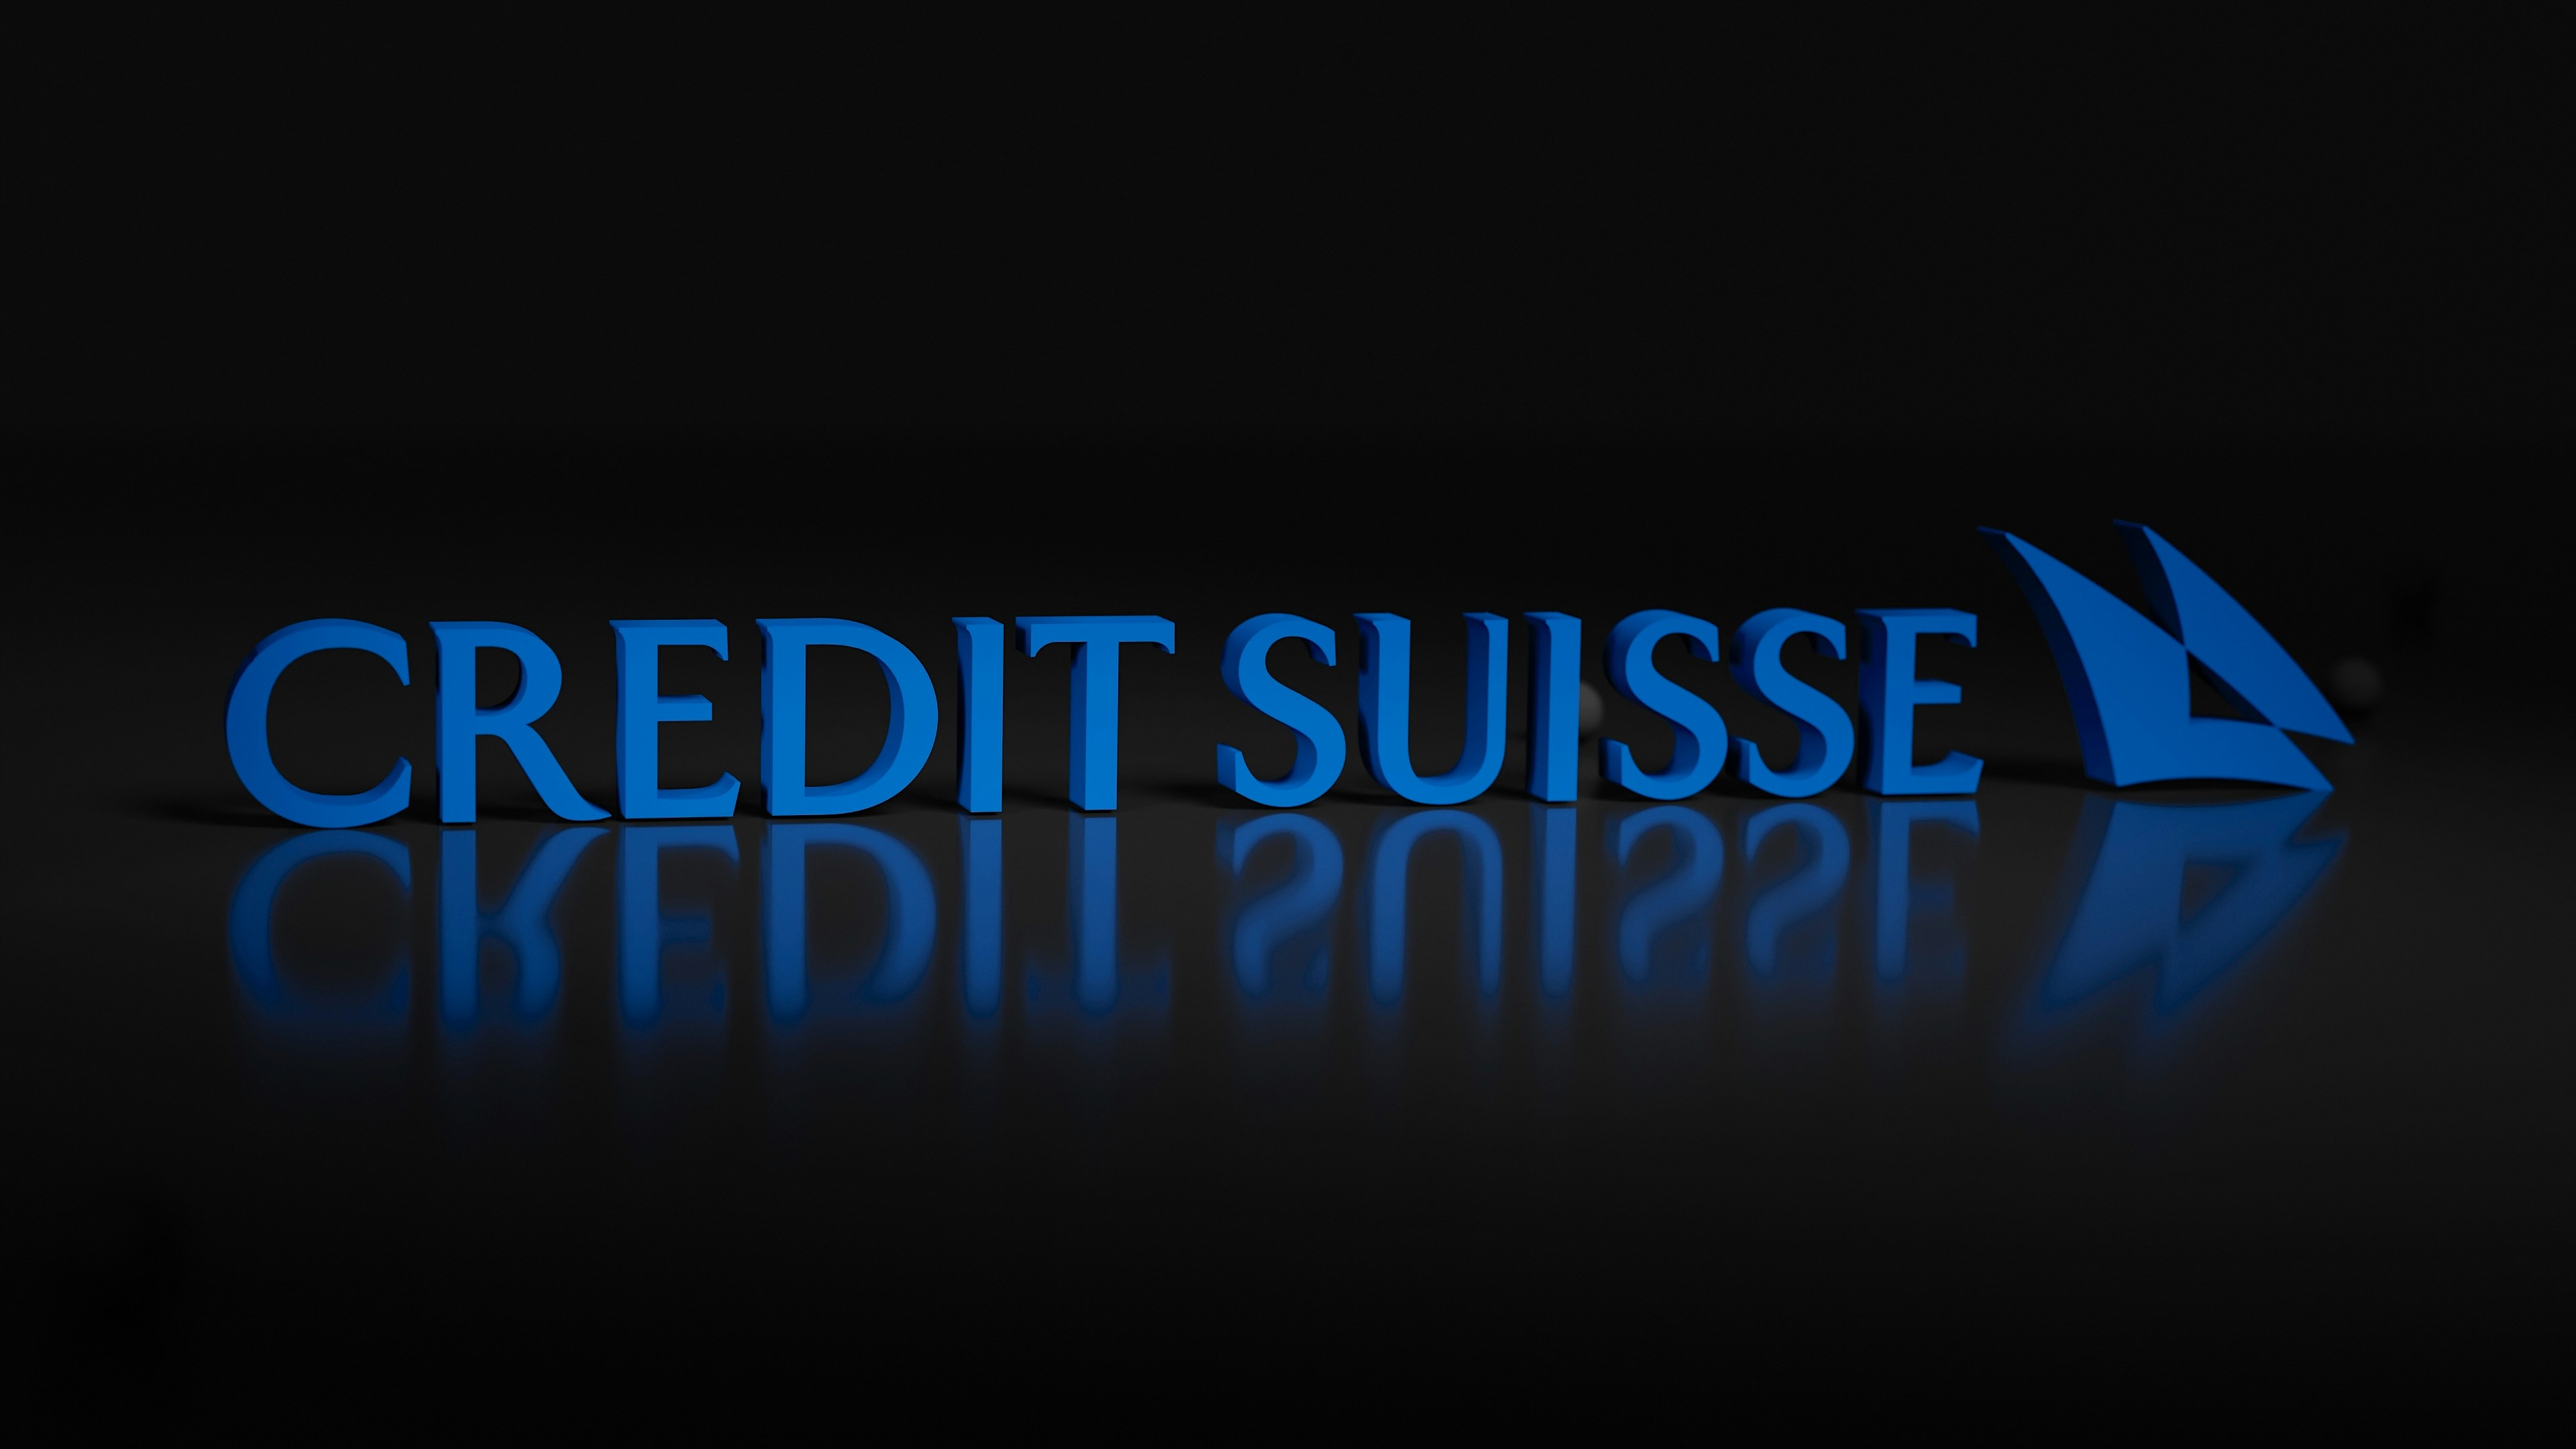 Credit Suisse Bank Logo in 3D. Feel free to contact me through email mariia.shalabaieva@gmail.com.